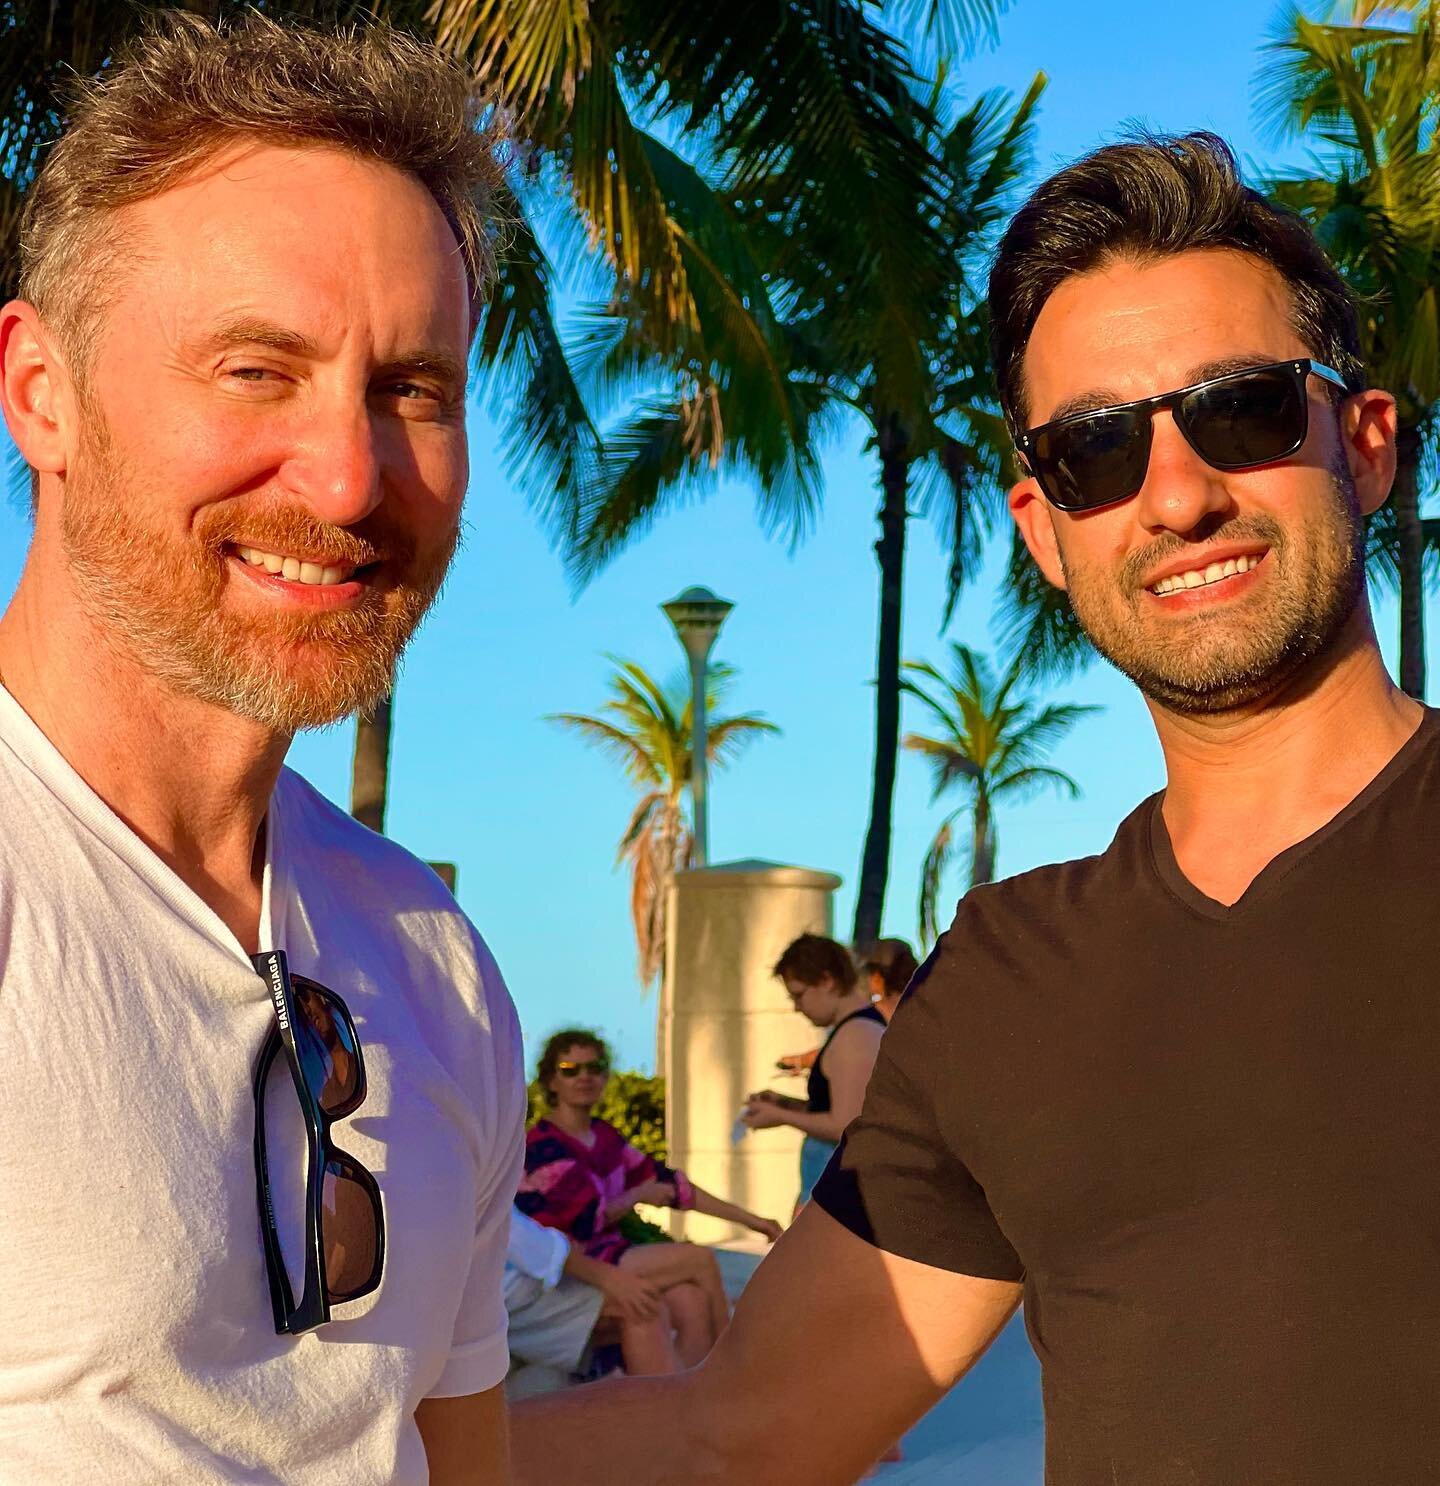 Today I met someone that I always looked up to when I first learned to produce music.
What a legend!
Nice to meet you! 
@davidguetta 
&bull;
&bull;
&bull;
&bull;
&bull;
&bull;
#davidguetta #alexkouros #dj